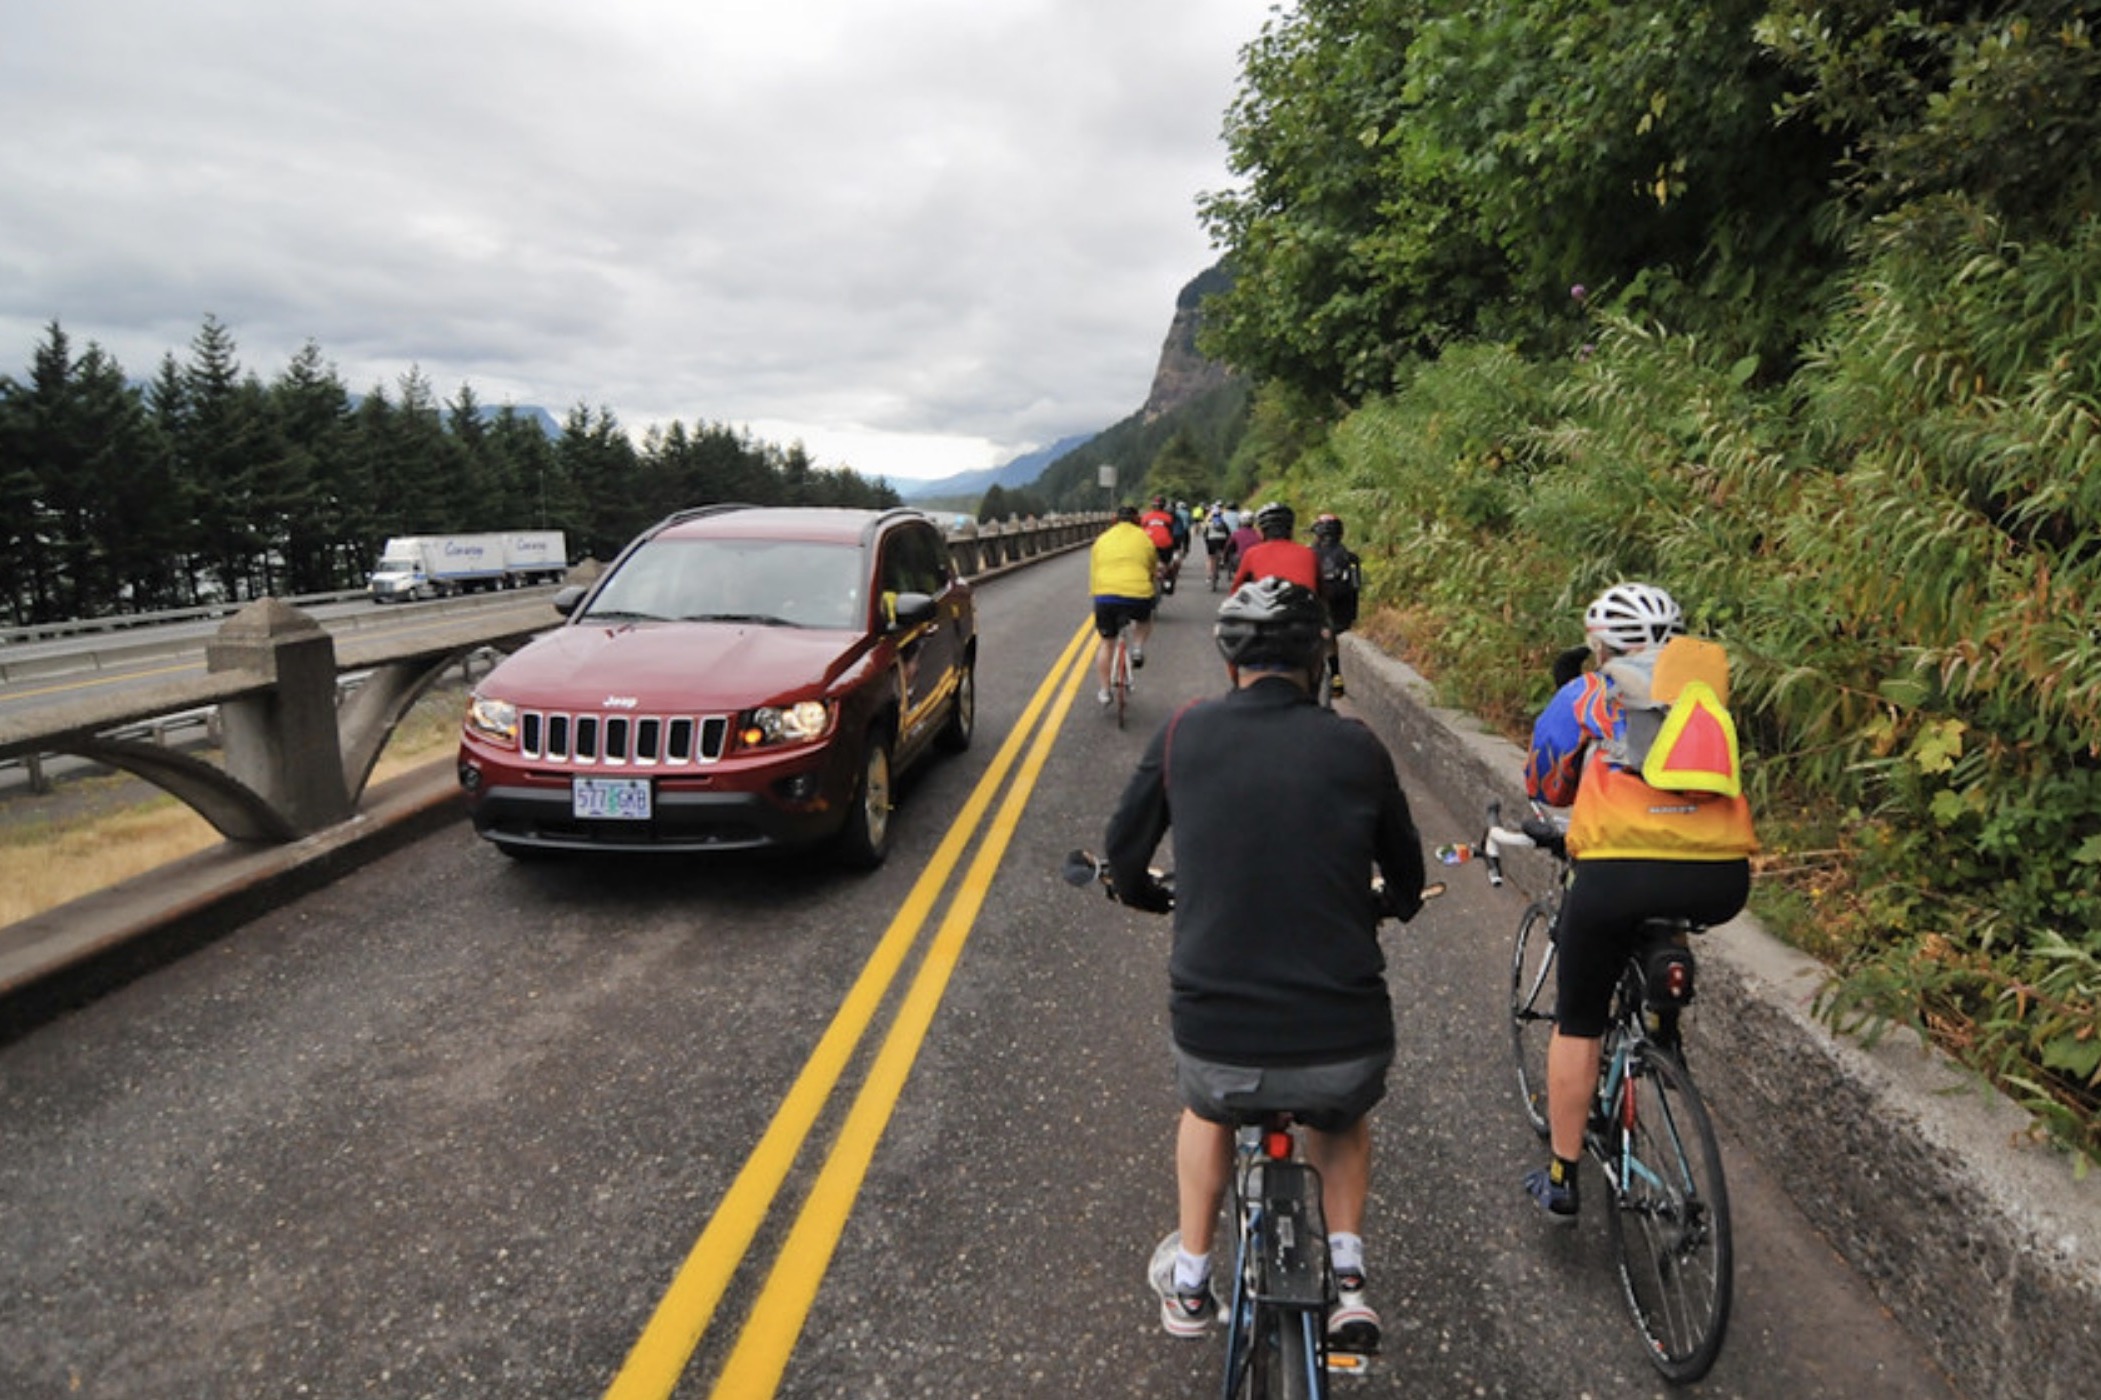 Bike Portland: Time to Look Past Cars, Says Gorge Leader